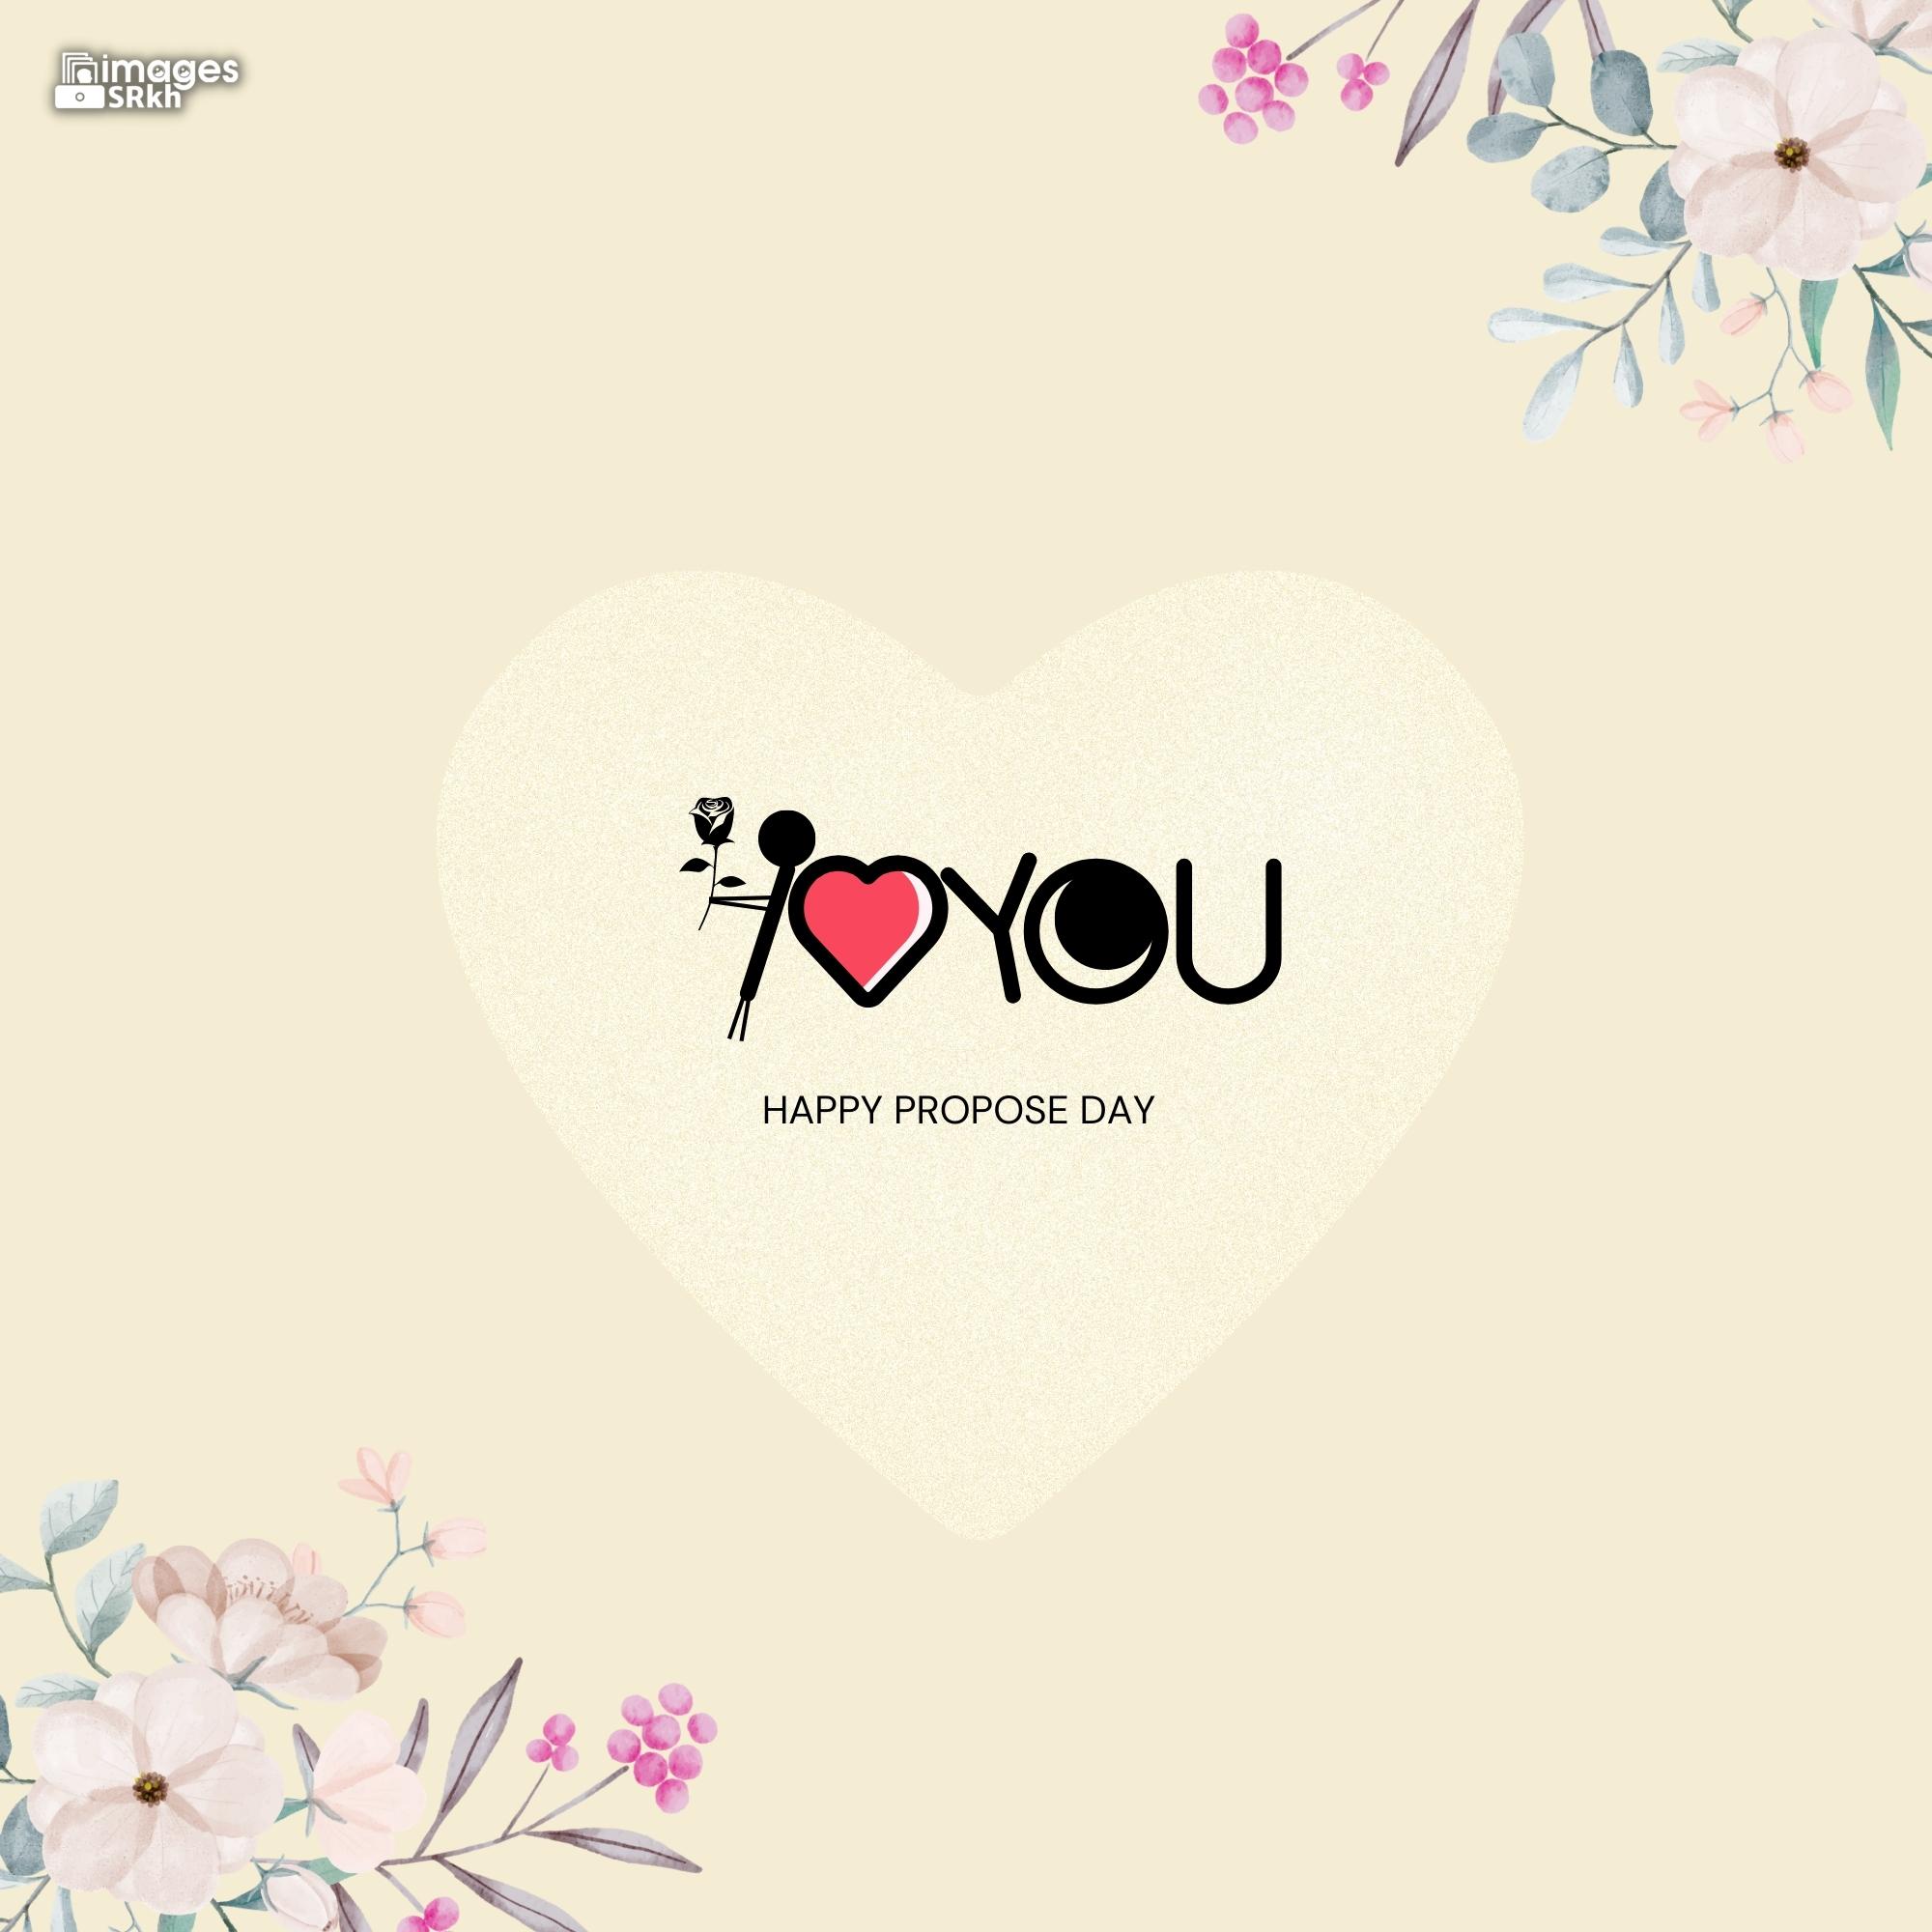 Happy Propose Day Images | 385 | I LOVE YOU